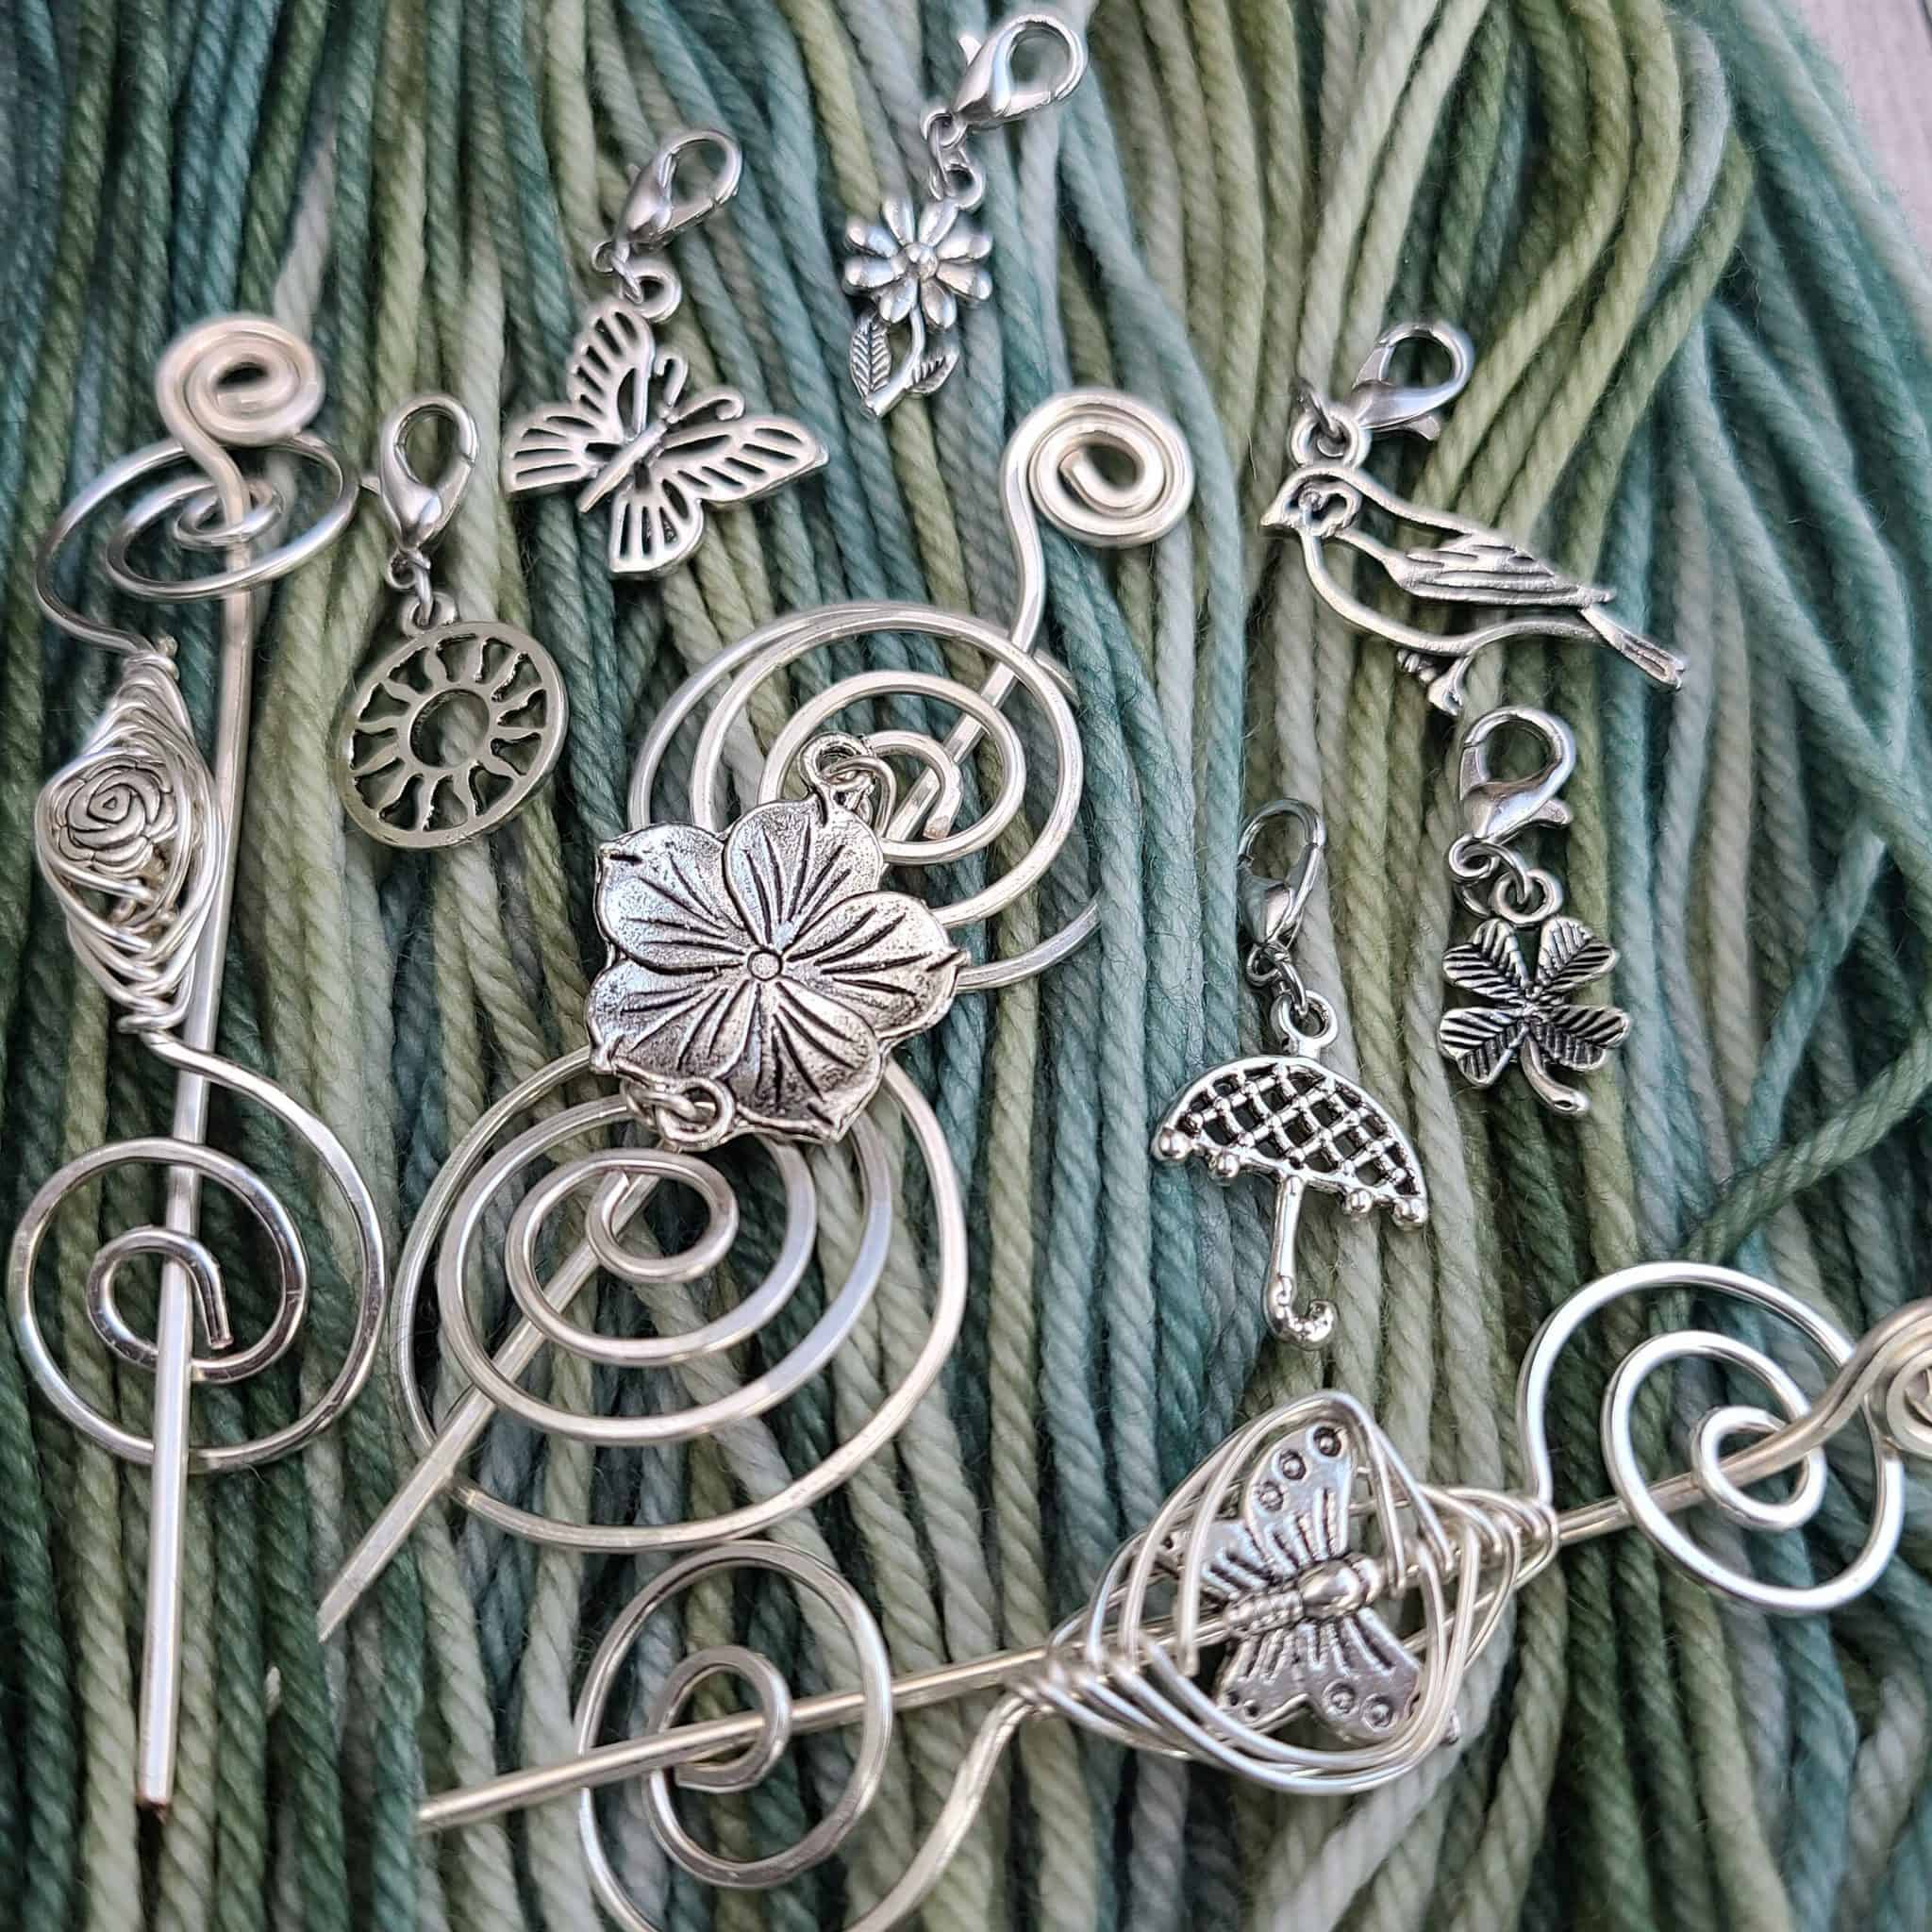 Silver metal shawl pins and stitch markers on a background of blue-green yarn.